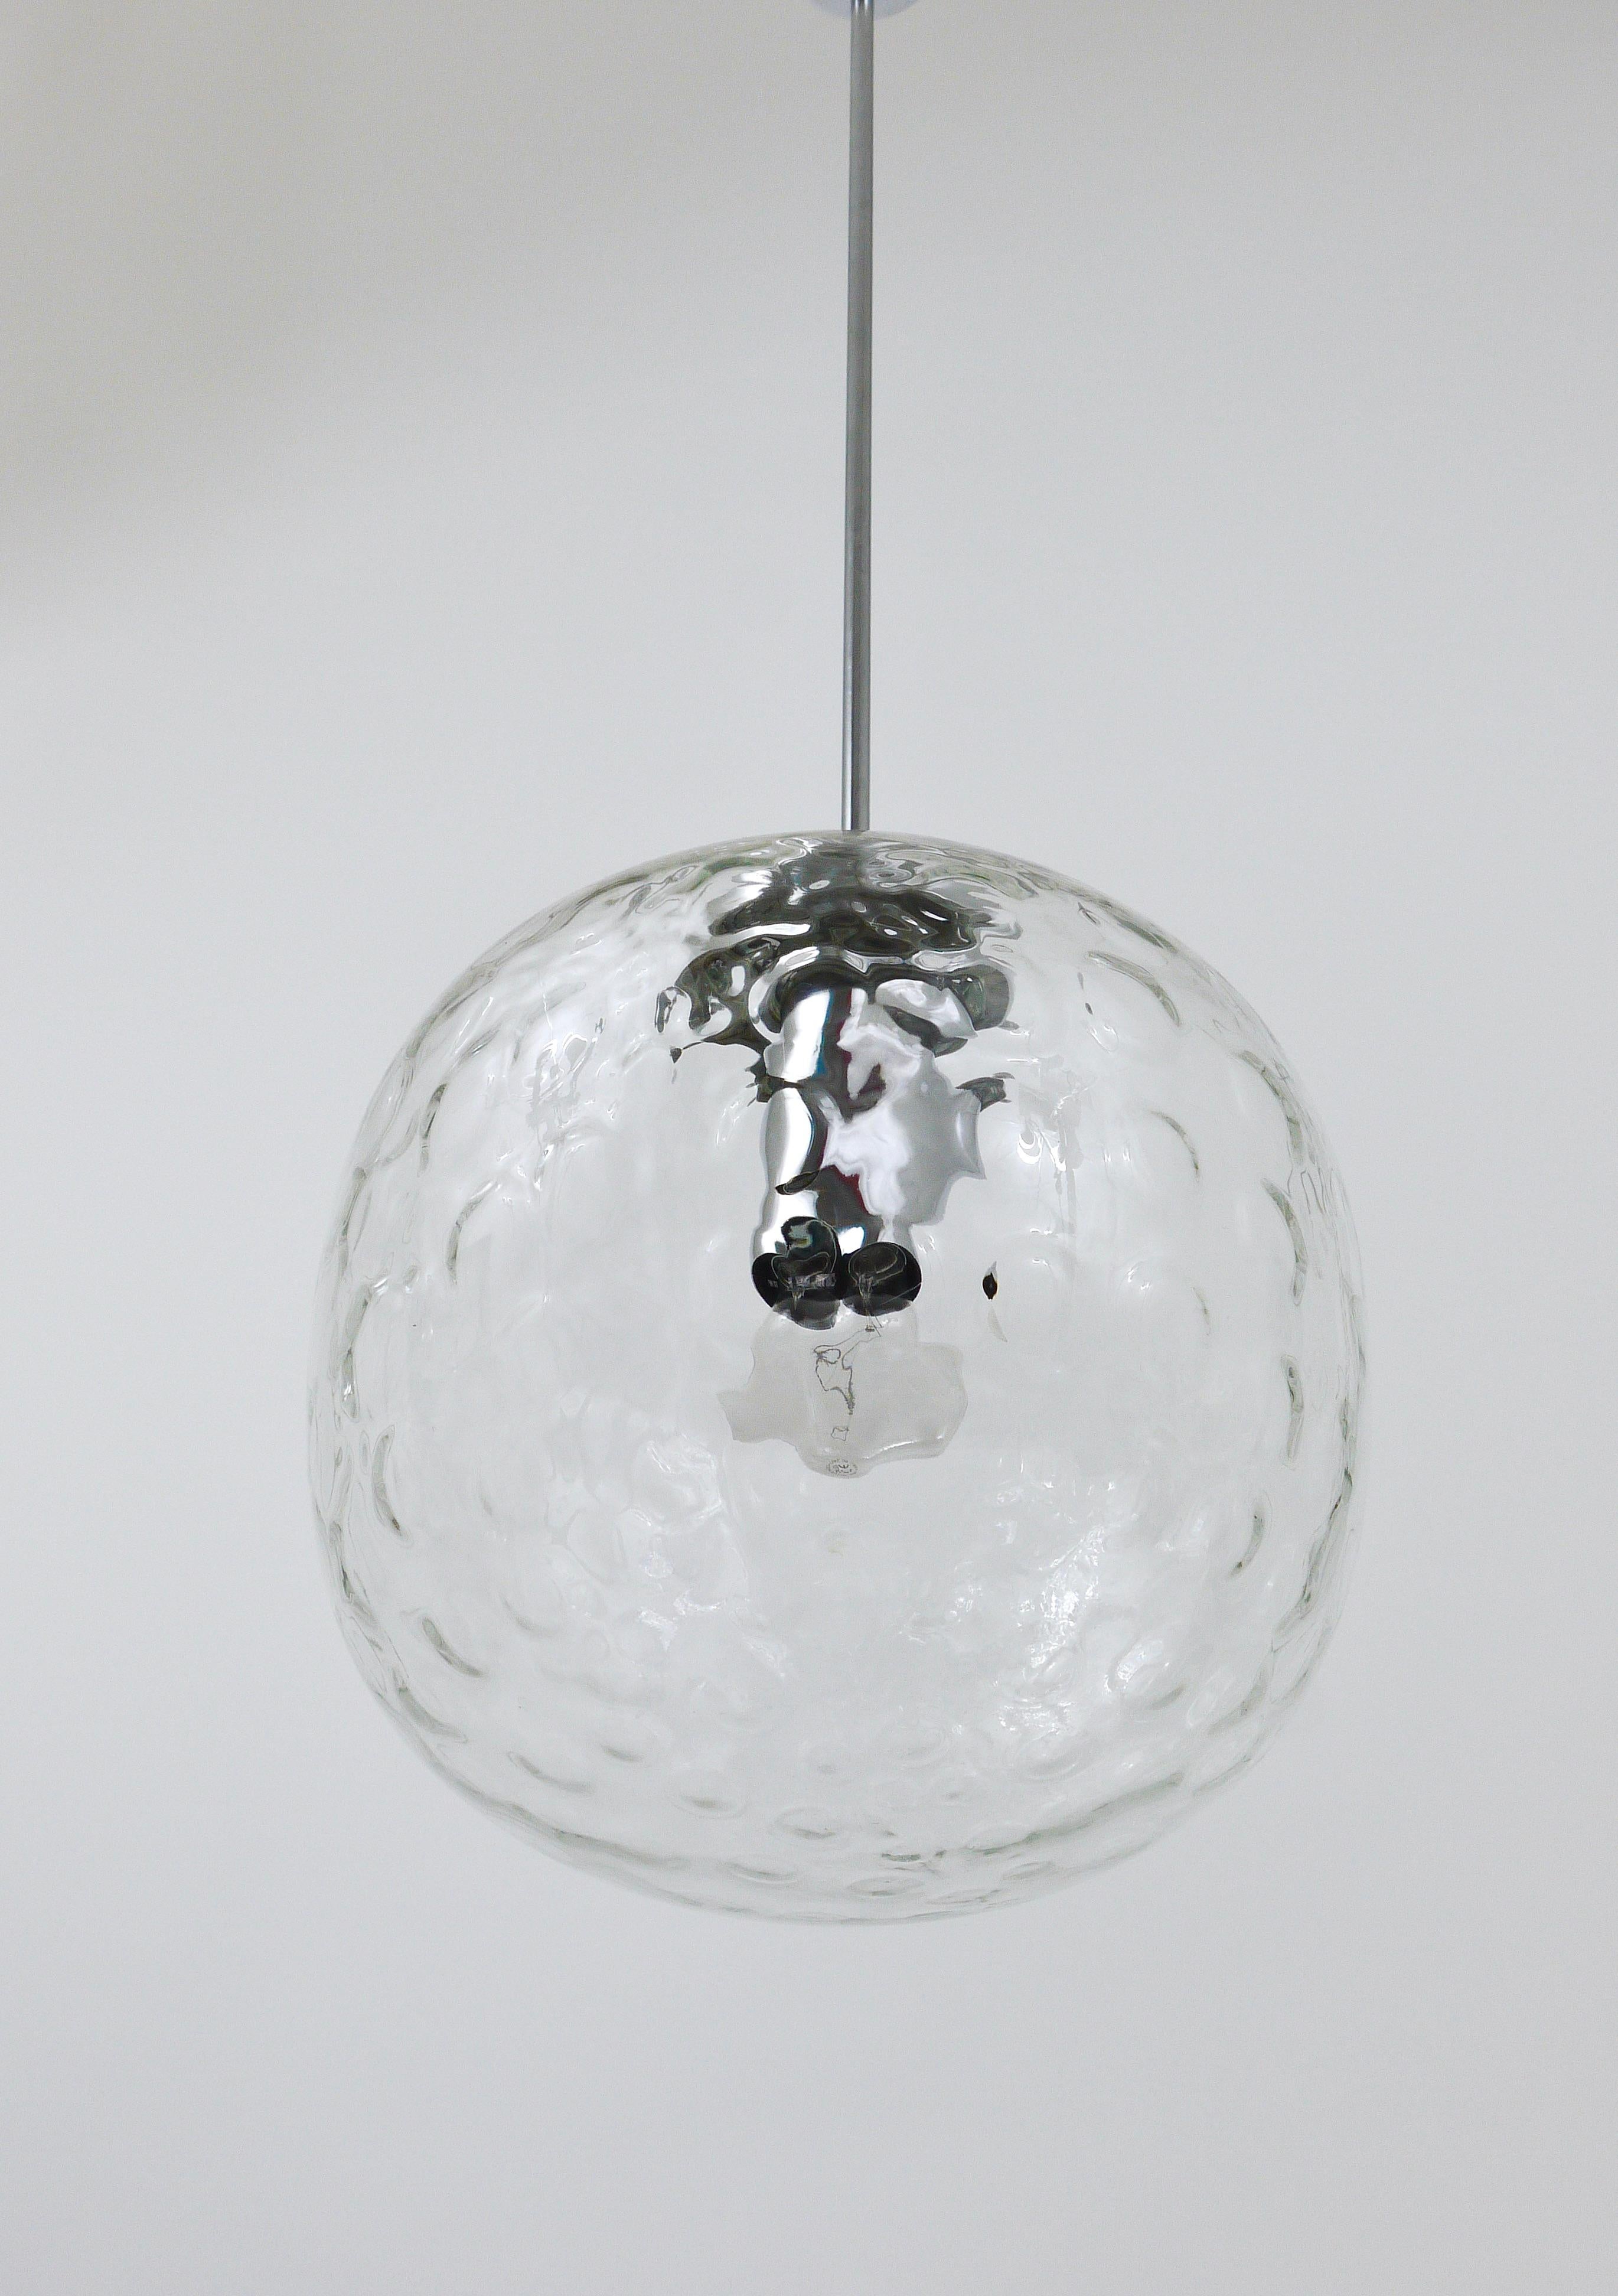 Large Bubble Melting Glass and Chrome Globe Pendant Lamp, Germany, 1970s In Good Condition For Sale In Vienna, AT